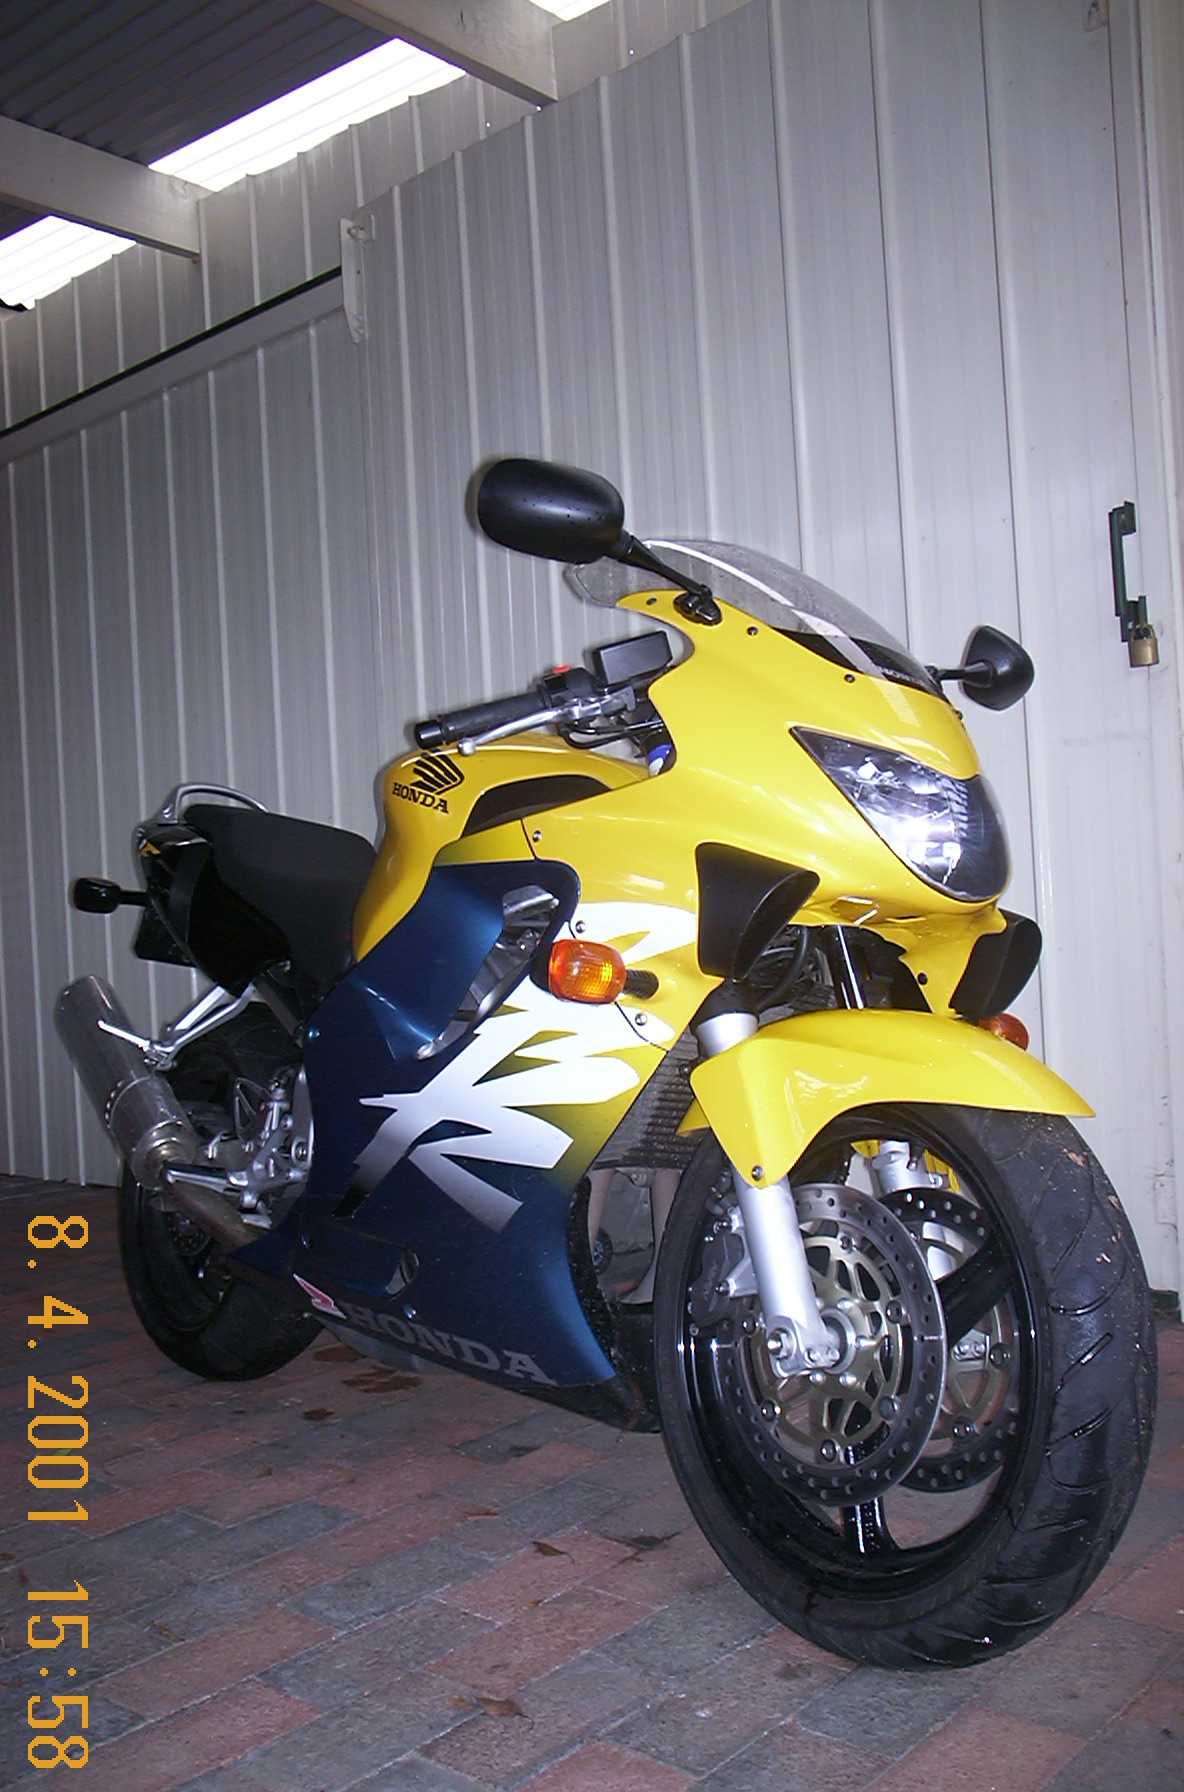 My earlier Honda CBR600 1999.  Sold to trade (up) to the Ducati 748